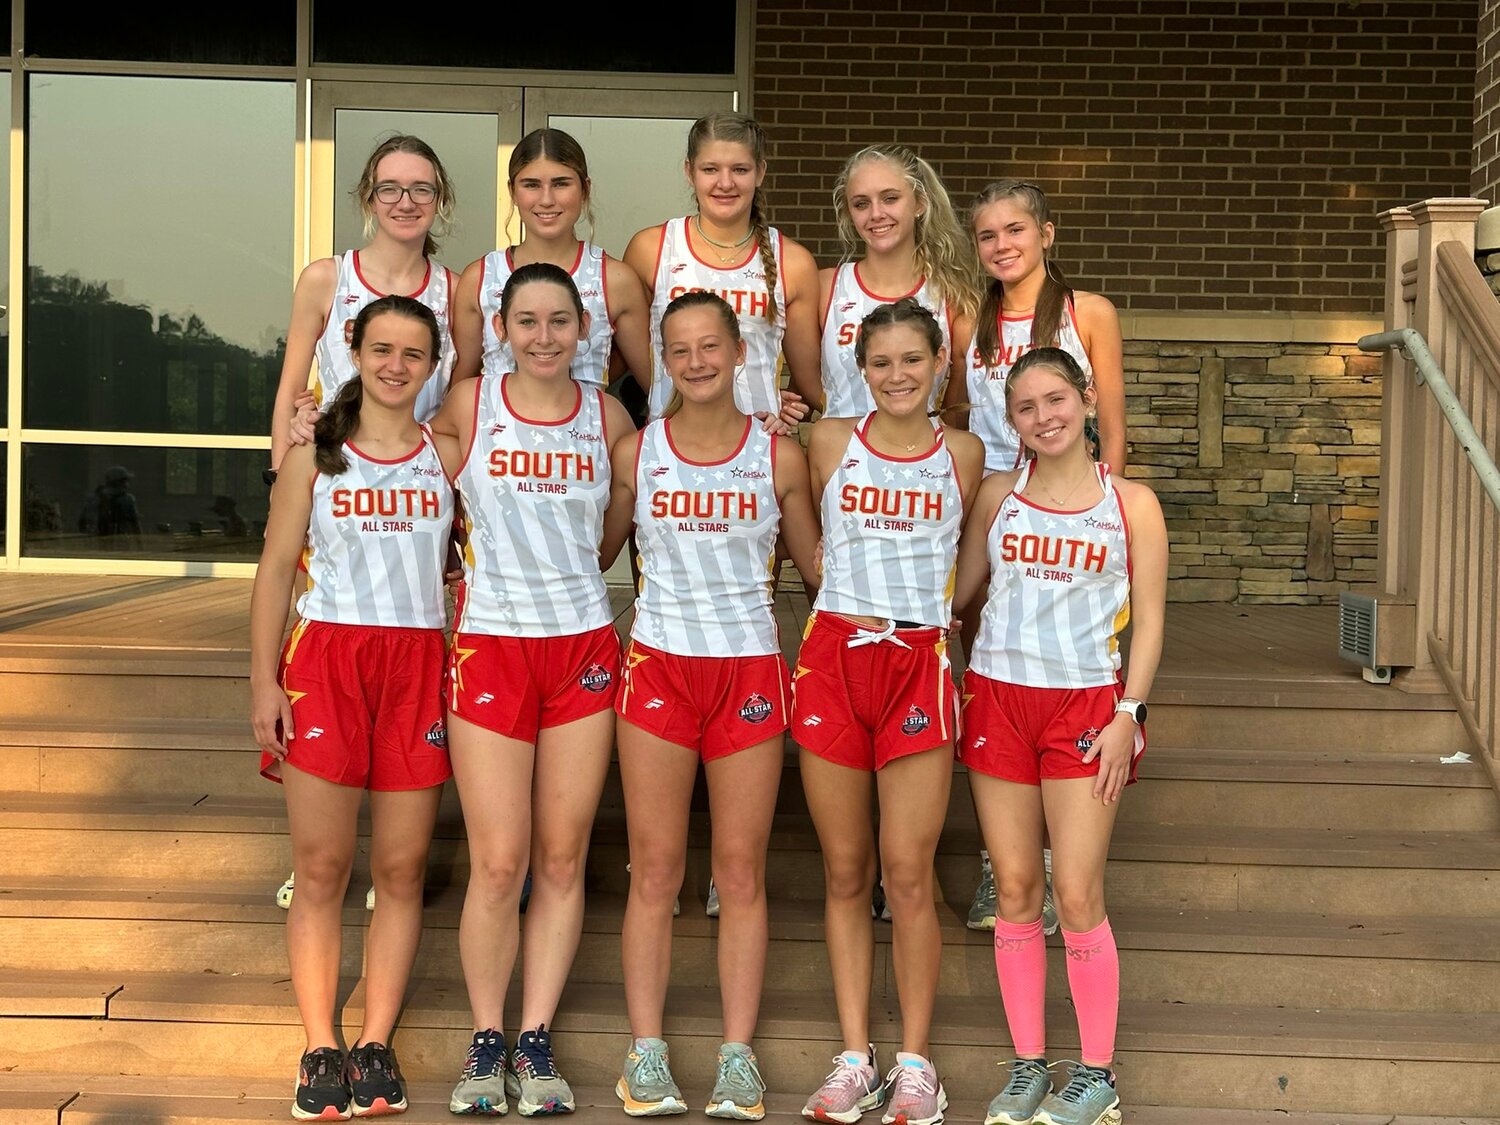 The South All-Star girls’ cross country squad poses for a team picture before the races on Tuesday, July 18, as part of the annual AHSAA North-South All-Star Week in Montgomery. Baldwin County was represented by Daphne’s Sophie West (first on the right in back row) and Spanish Fort’s Alexiana Hinote (second on the right in front row) who both recorded top-15 finishes.